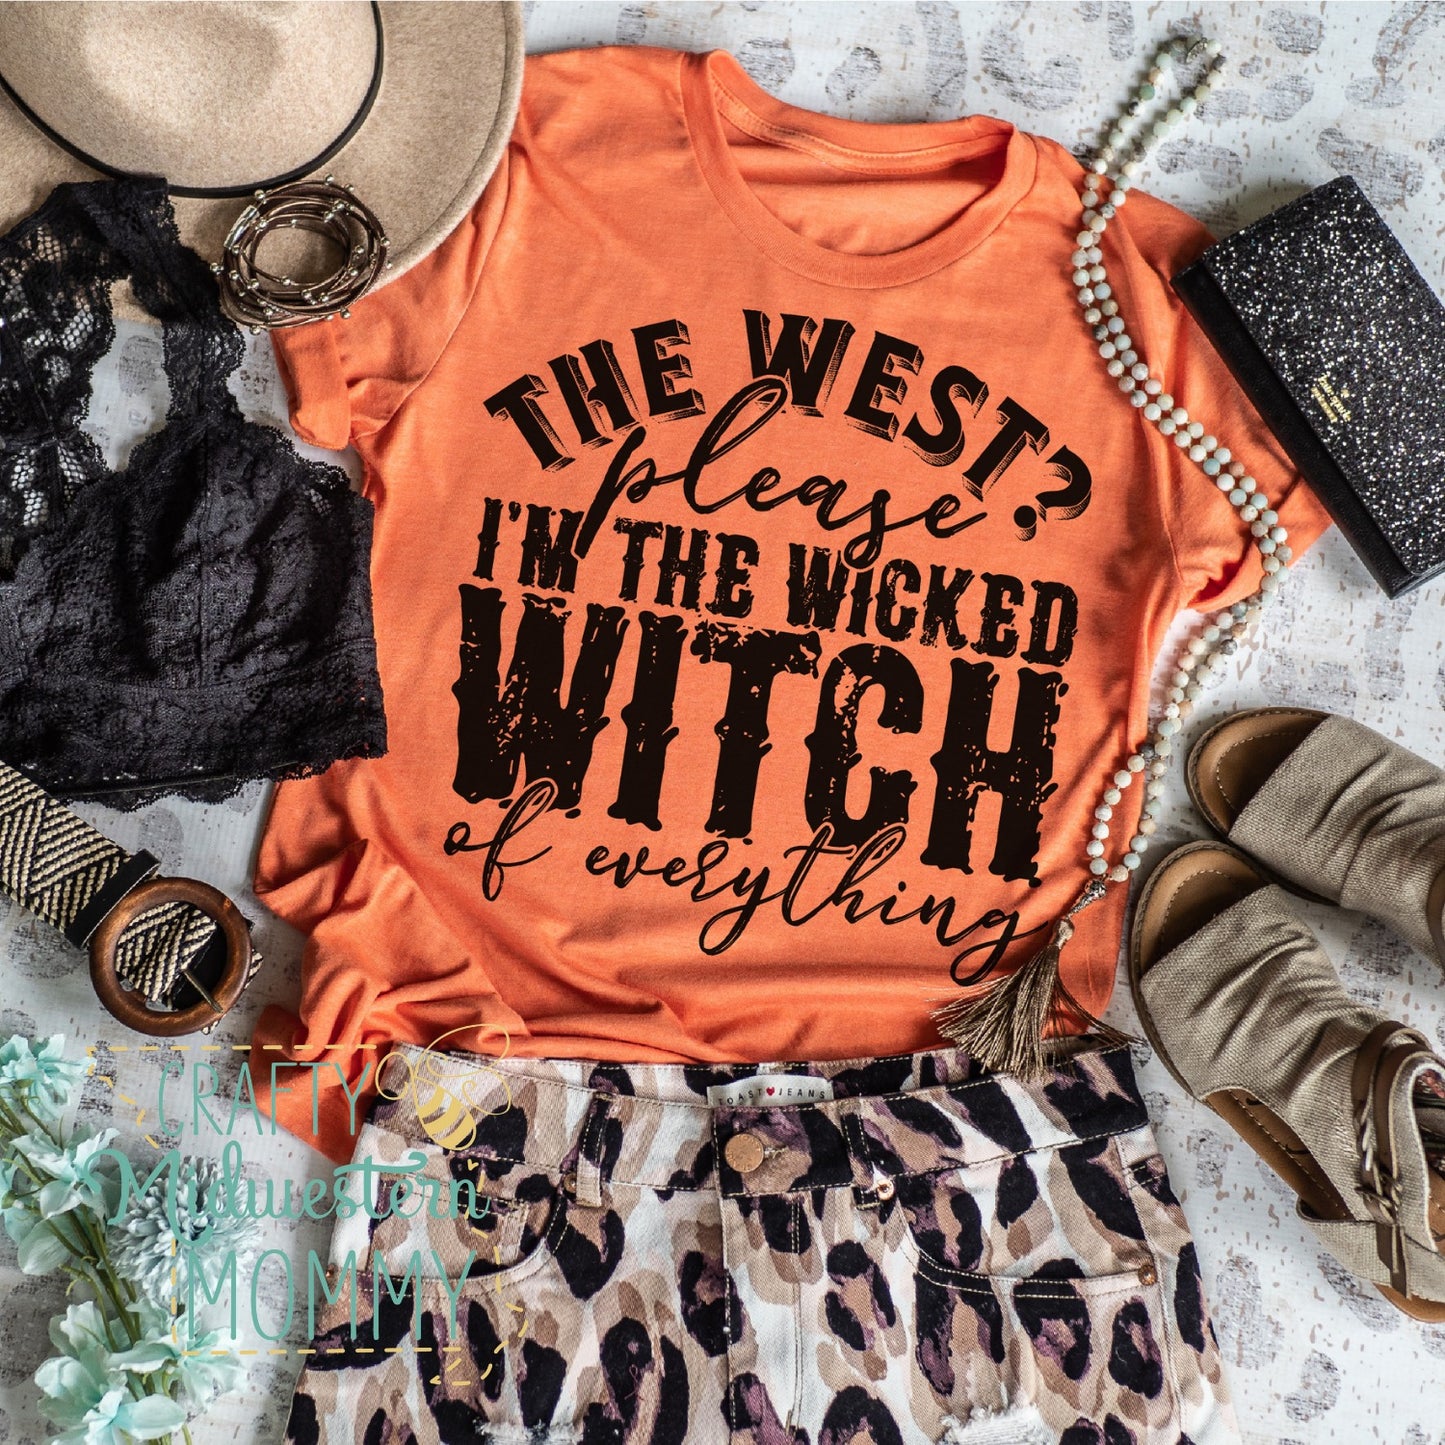 Wicked Witch of Everything Adult Graphic Tee